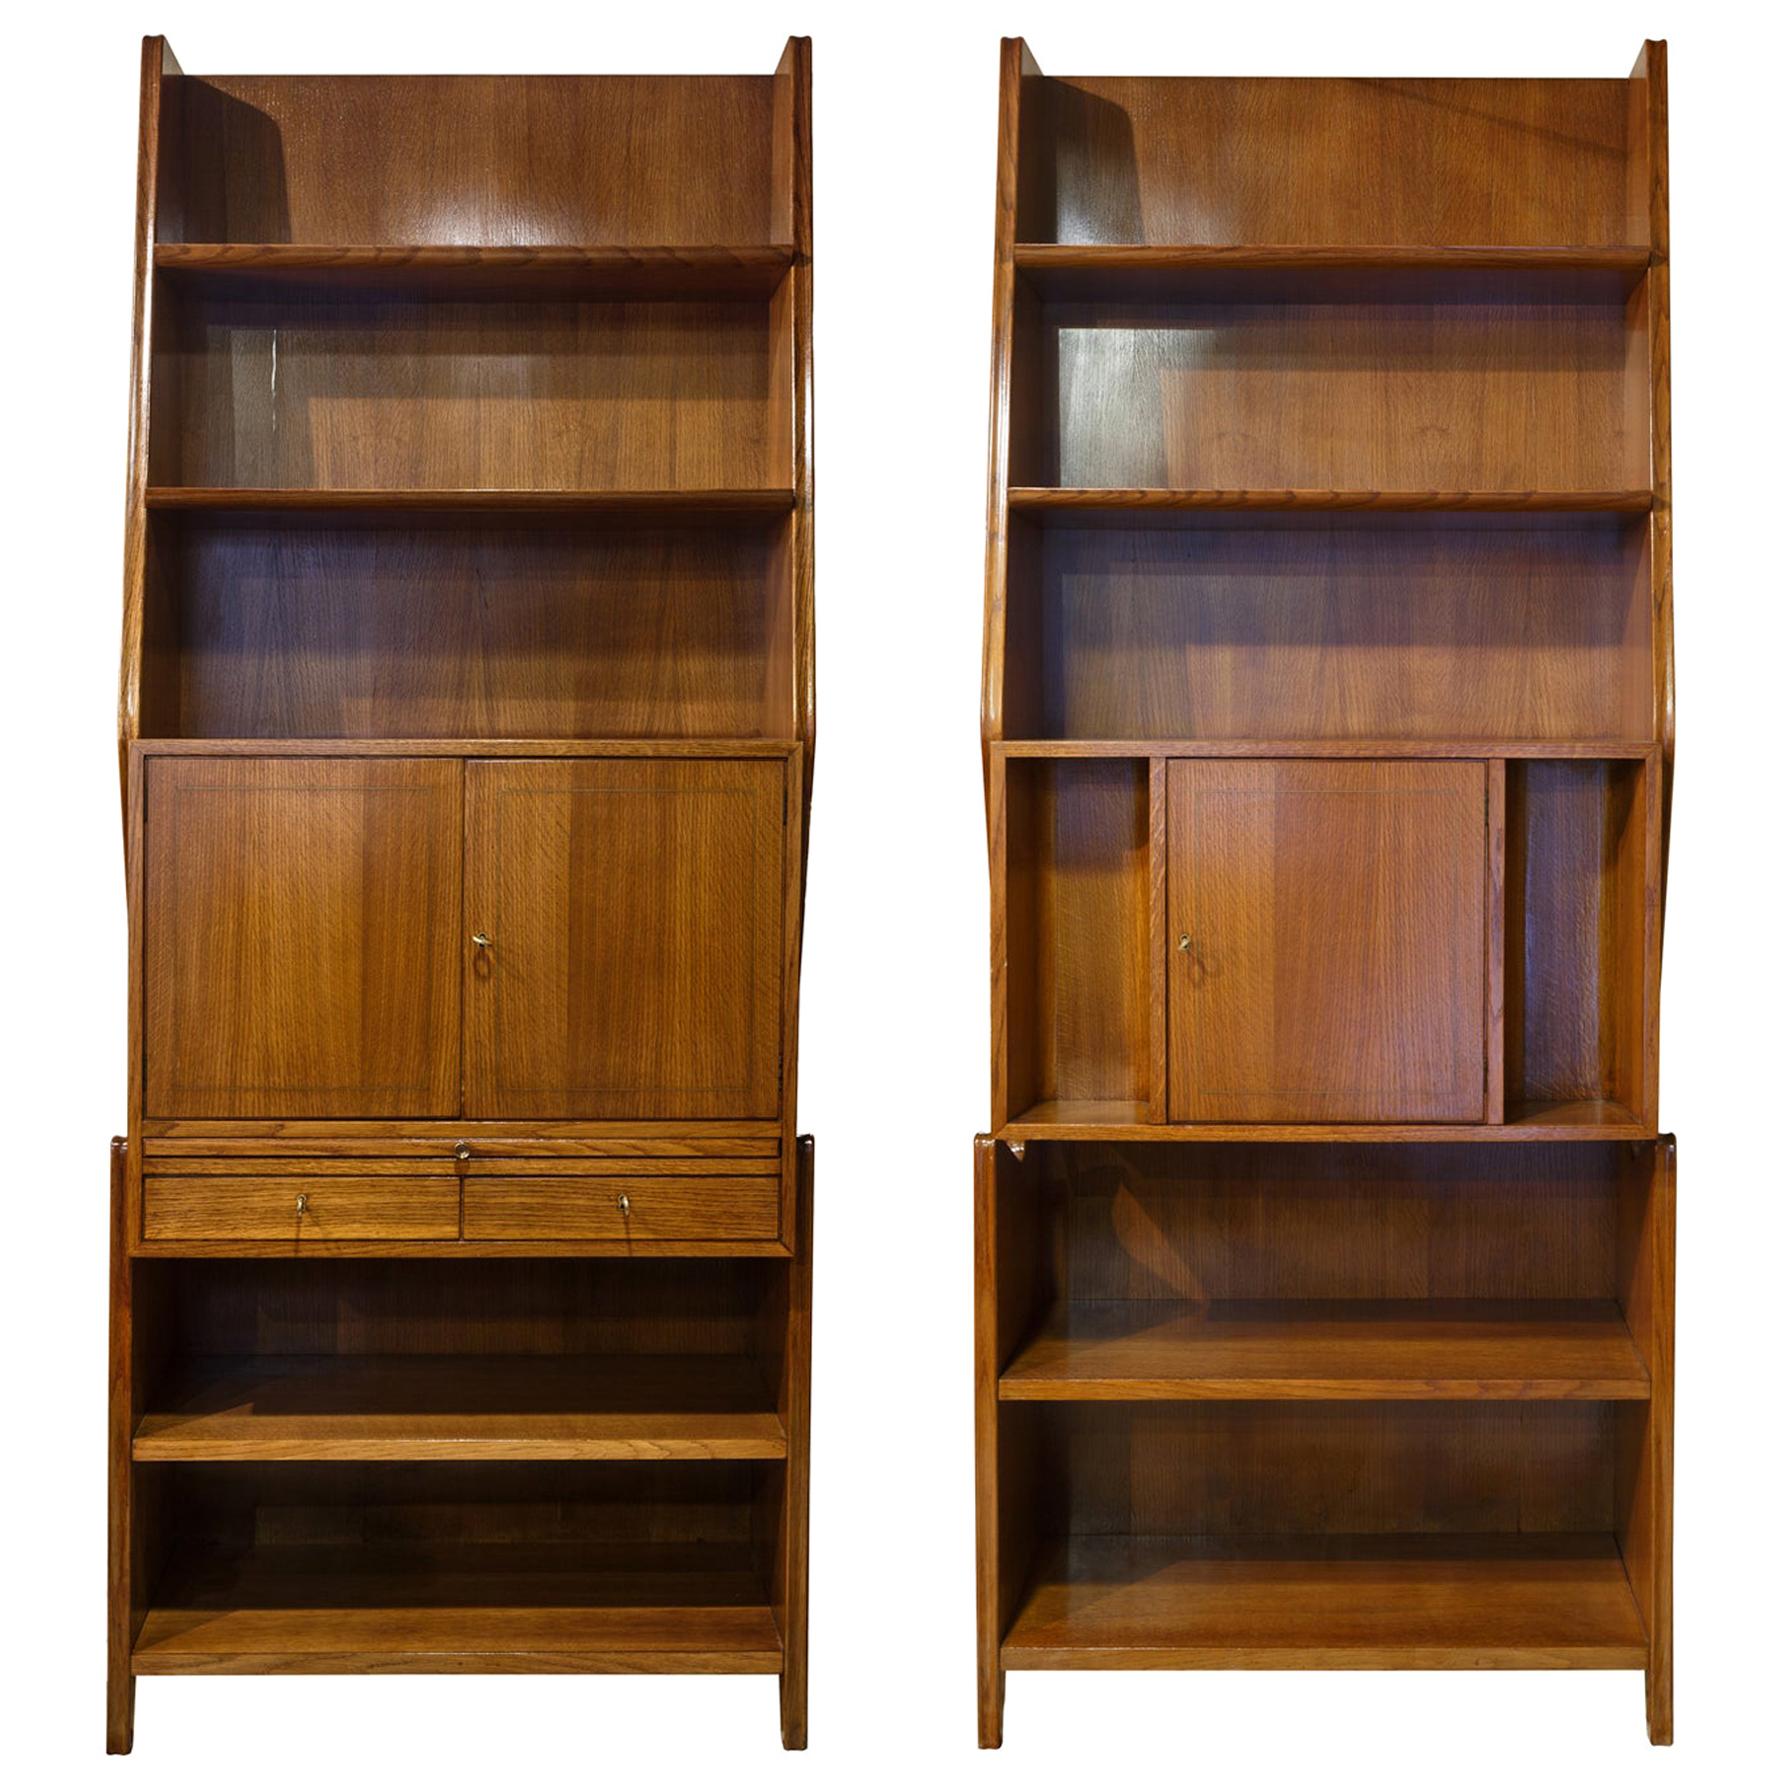 2 Bookcases Mid-Century Modern in Gio Ponti Style 1950s Italy